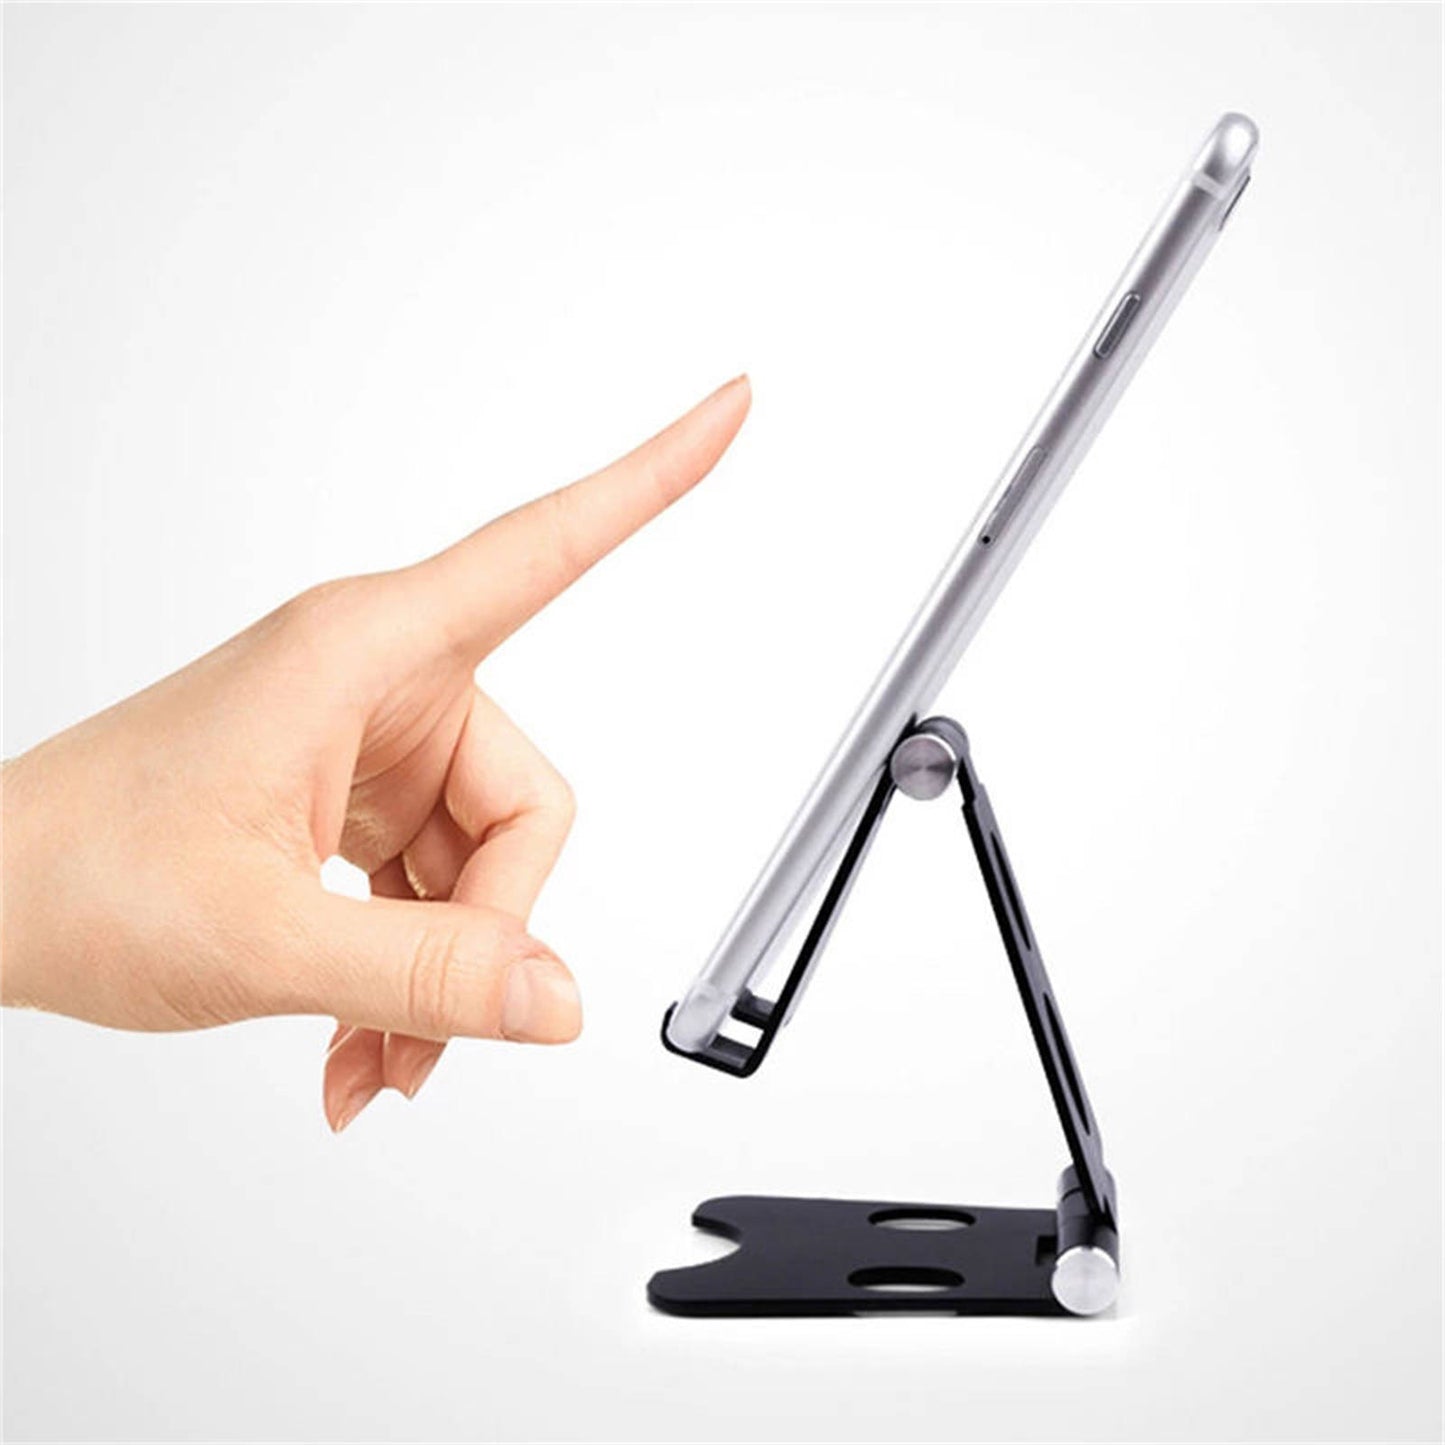 Mobax Phone Holder With Portable Multi-Function Metal Holder Foldable and Adjustable.